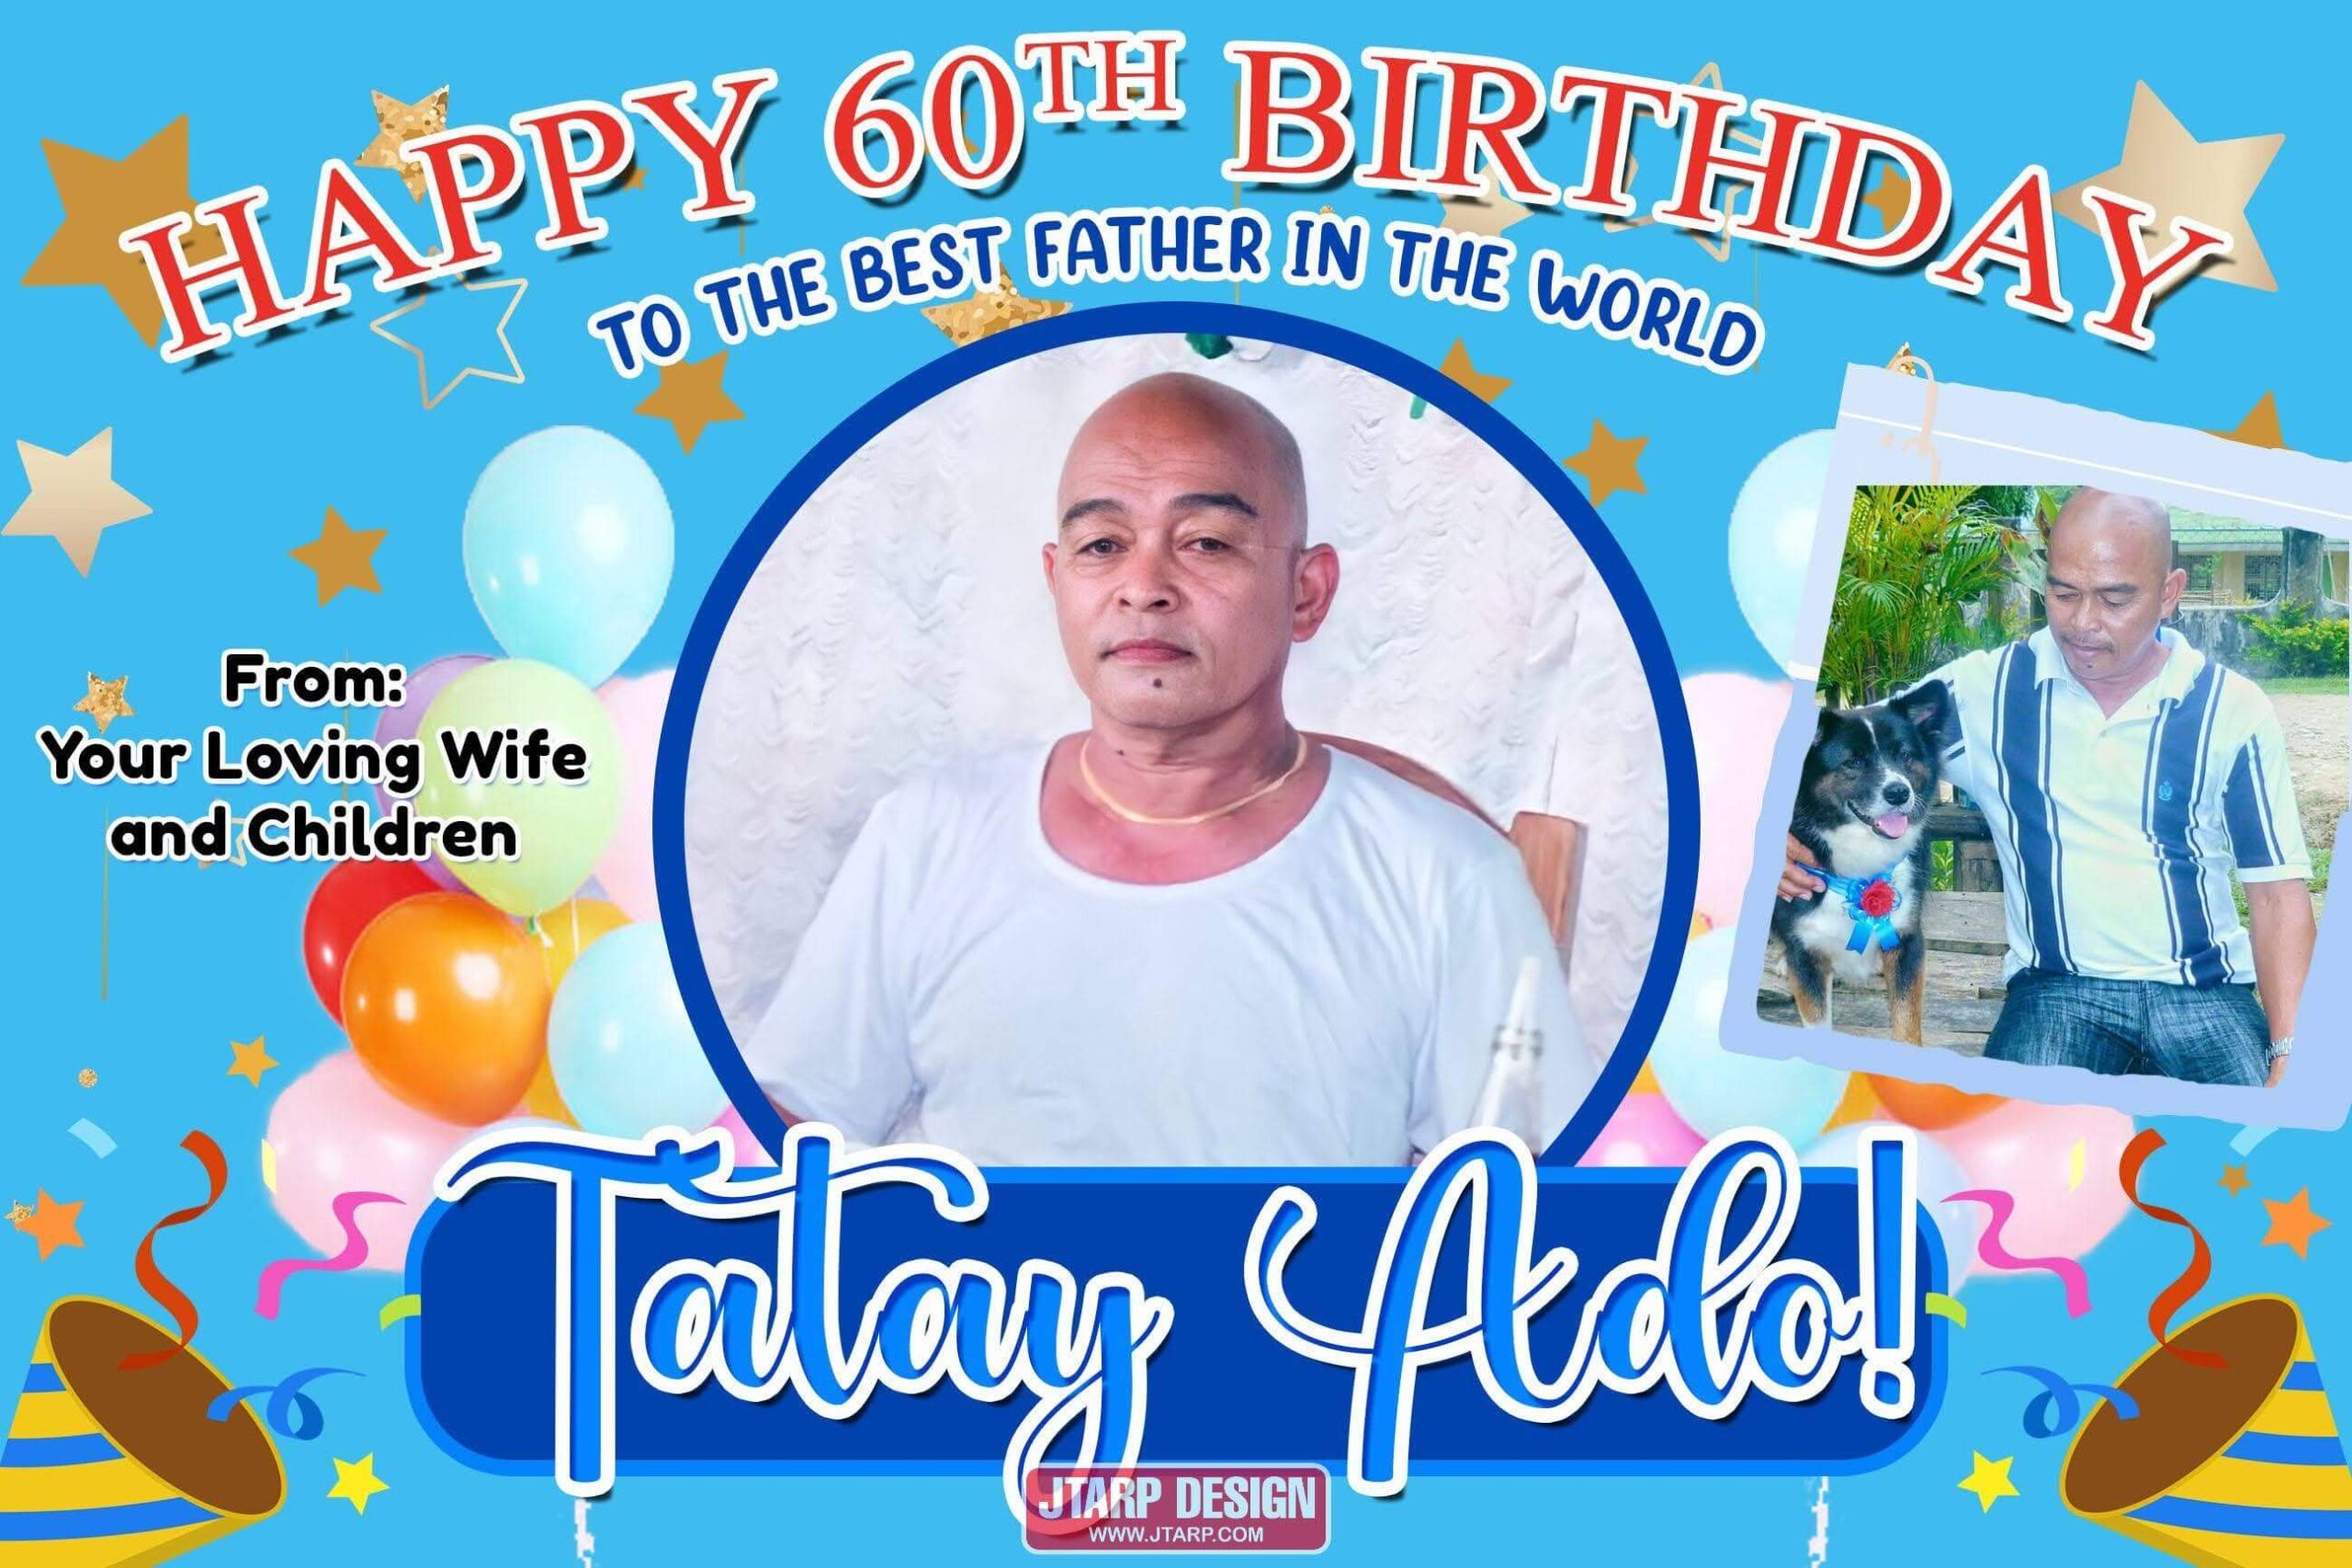 3x2 Happy 60th Birthday to the Best Father in the world Tatay Ado